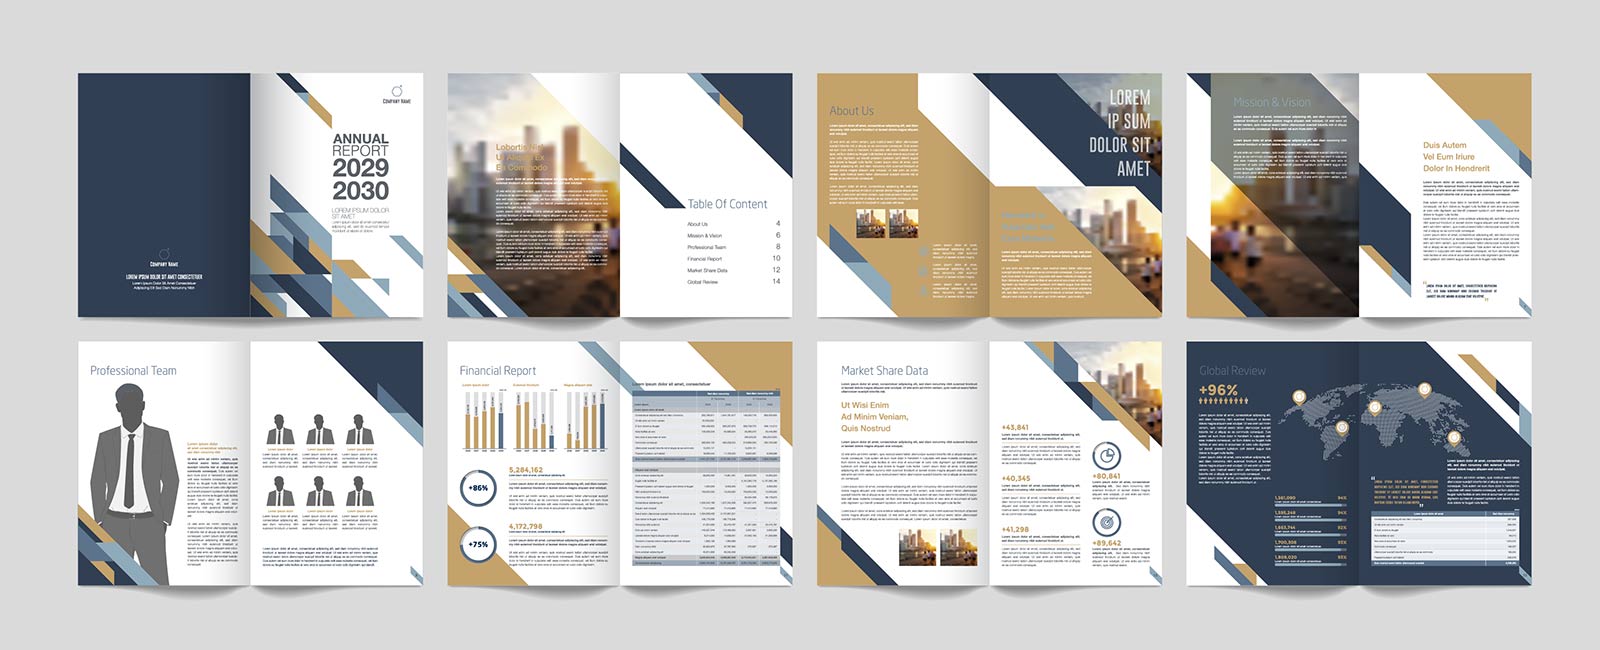 A set of annual report spreads on a grey background.